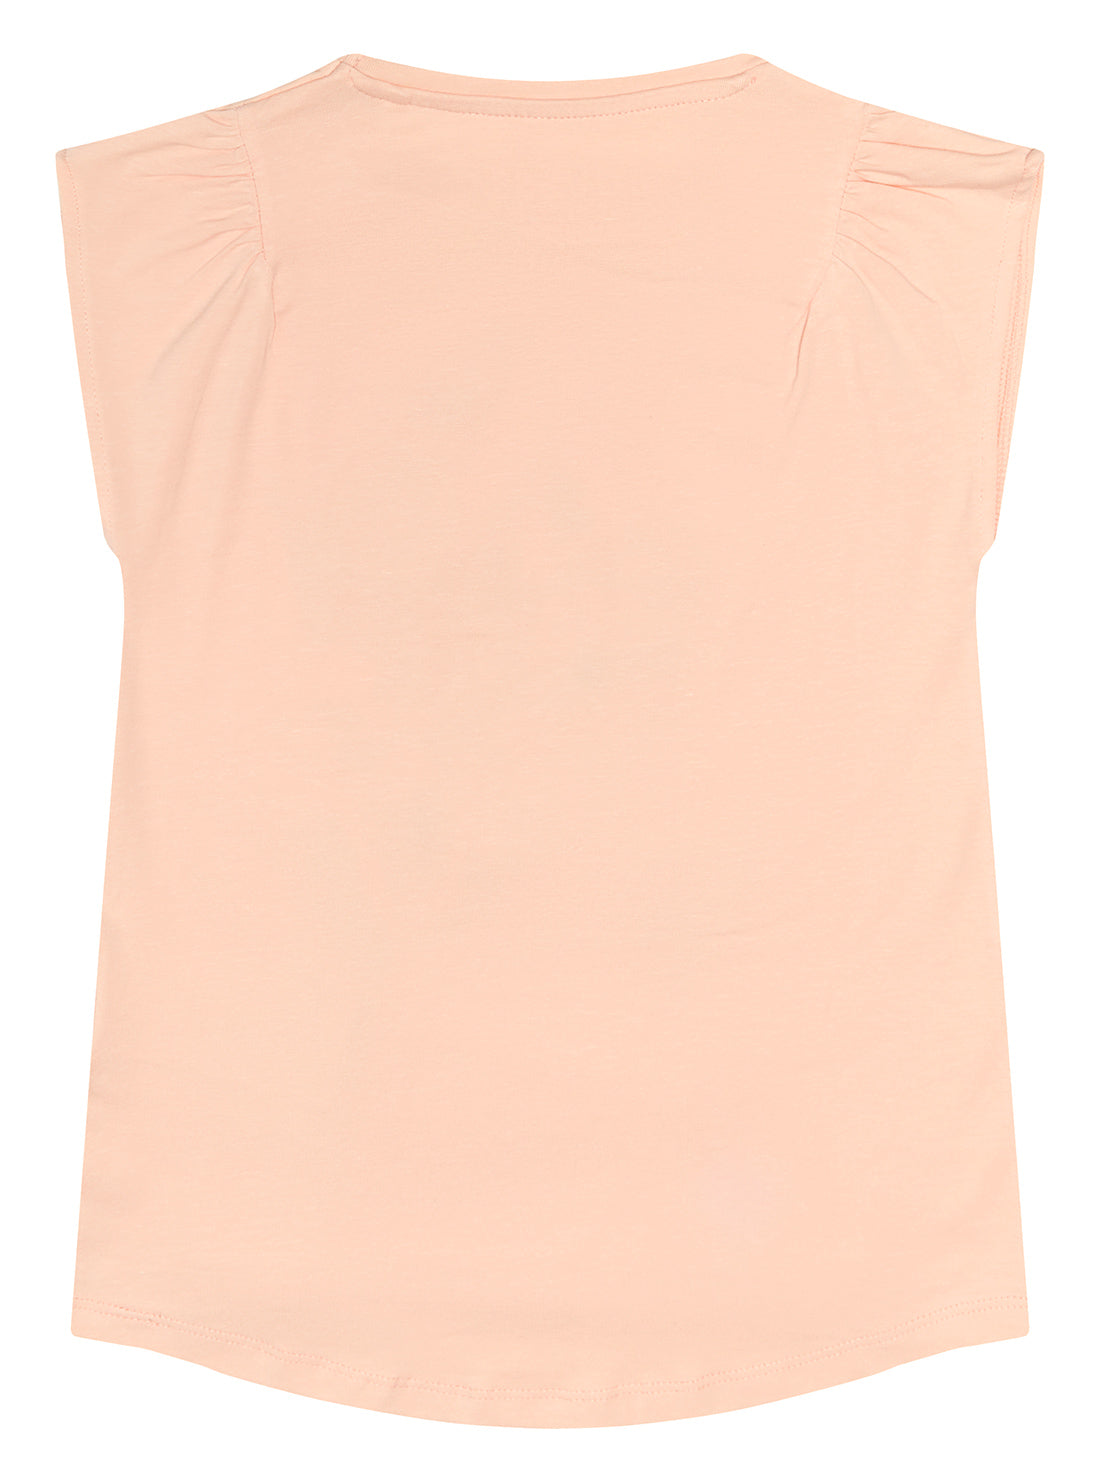 Girl's Peach Journey Graphic T-Shirt back view